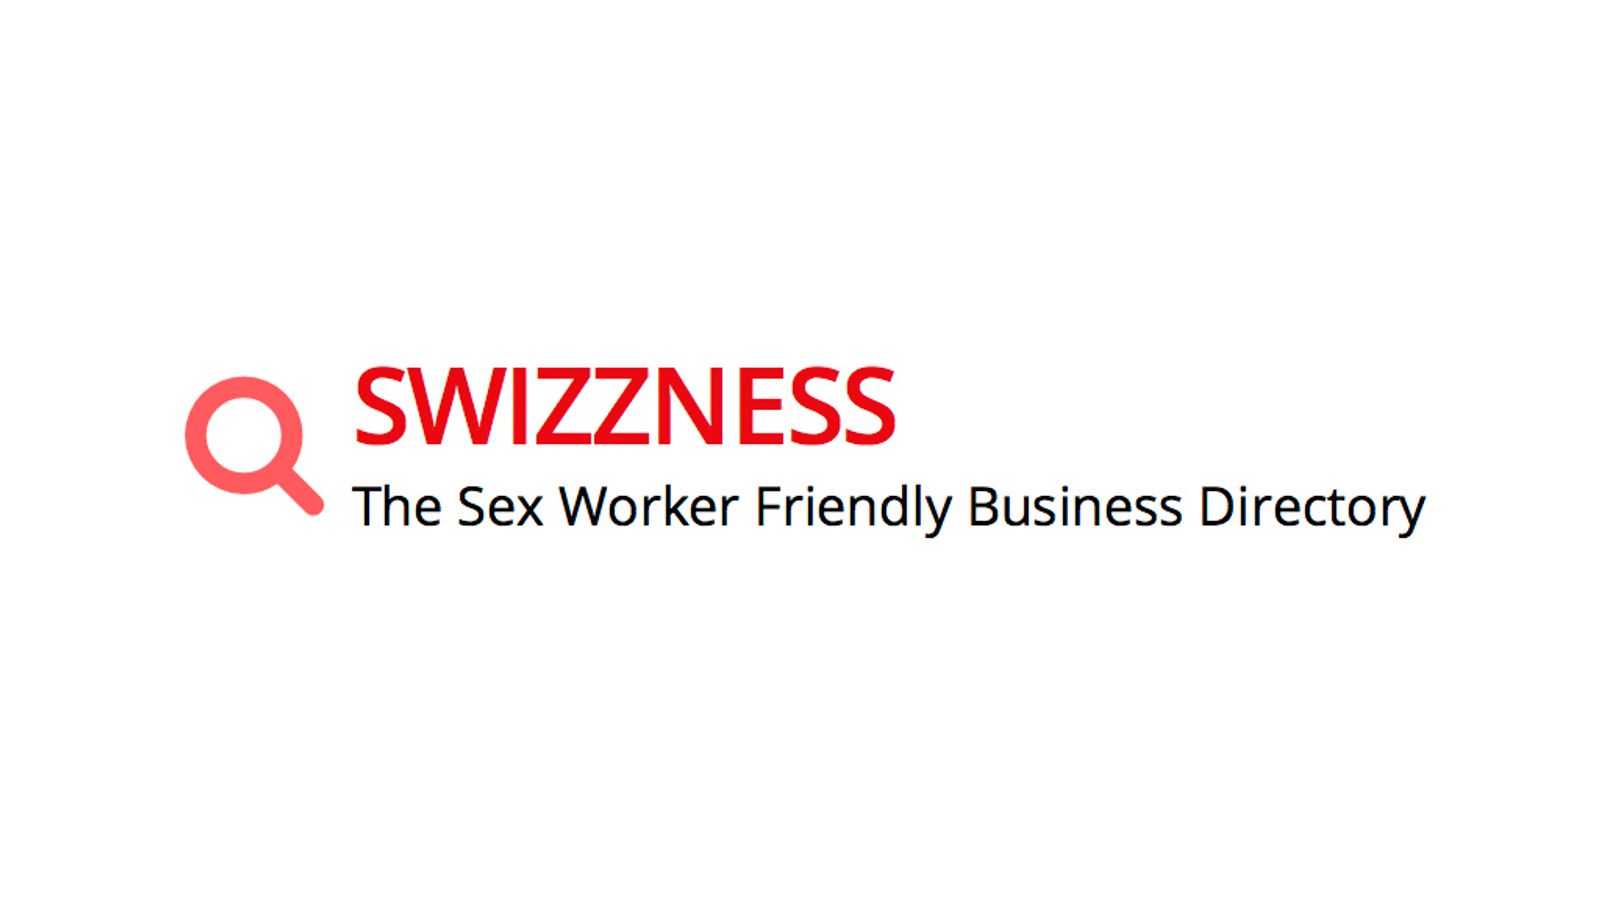 Swizzness.com, A Sex-Worker-Friendly Business Directory, Launches